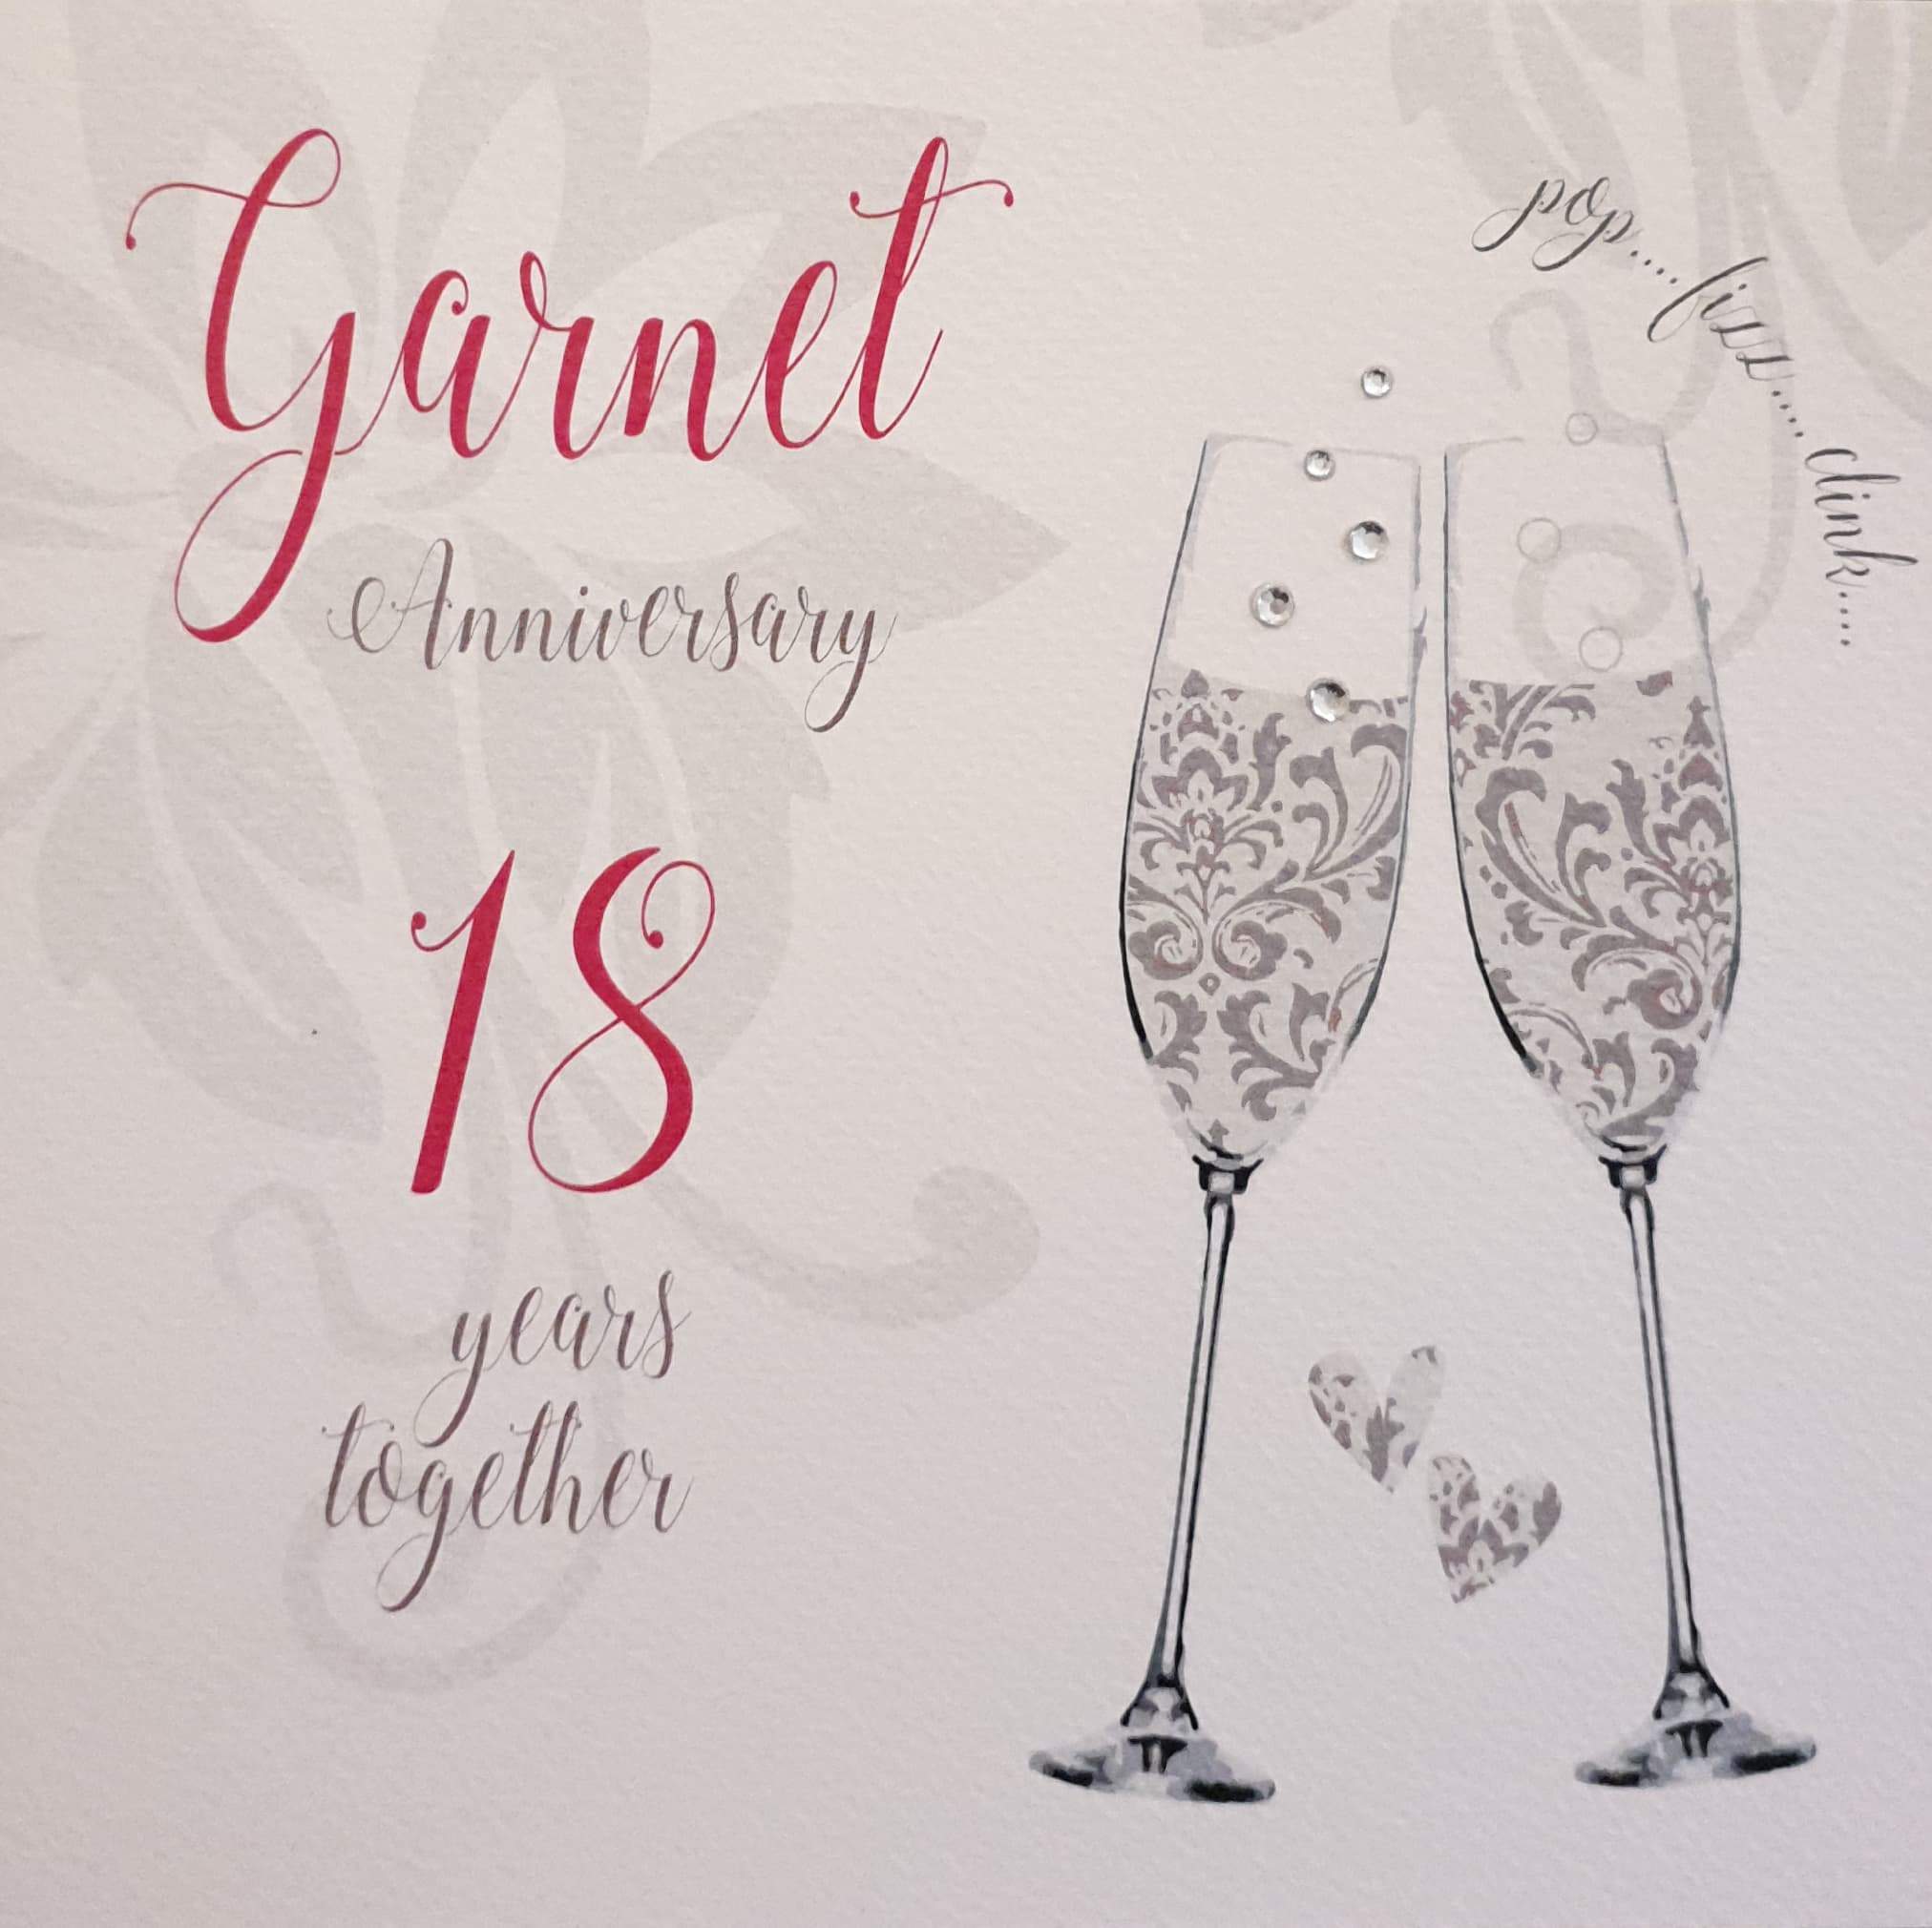 Anniversary Card - Garnet Anniversary - 18 Years Together /Two Champagne Glasses with Silver Designs